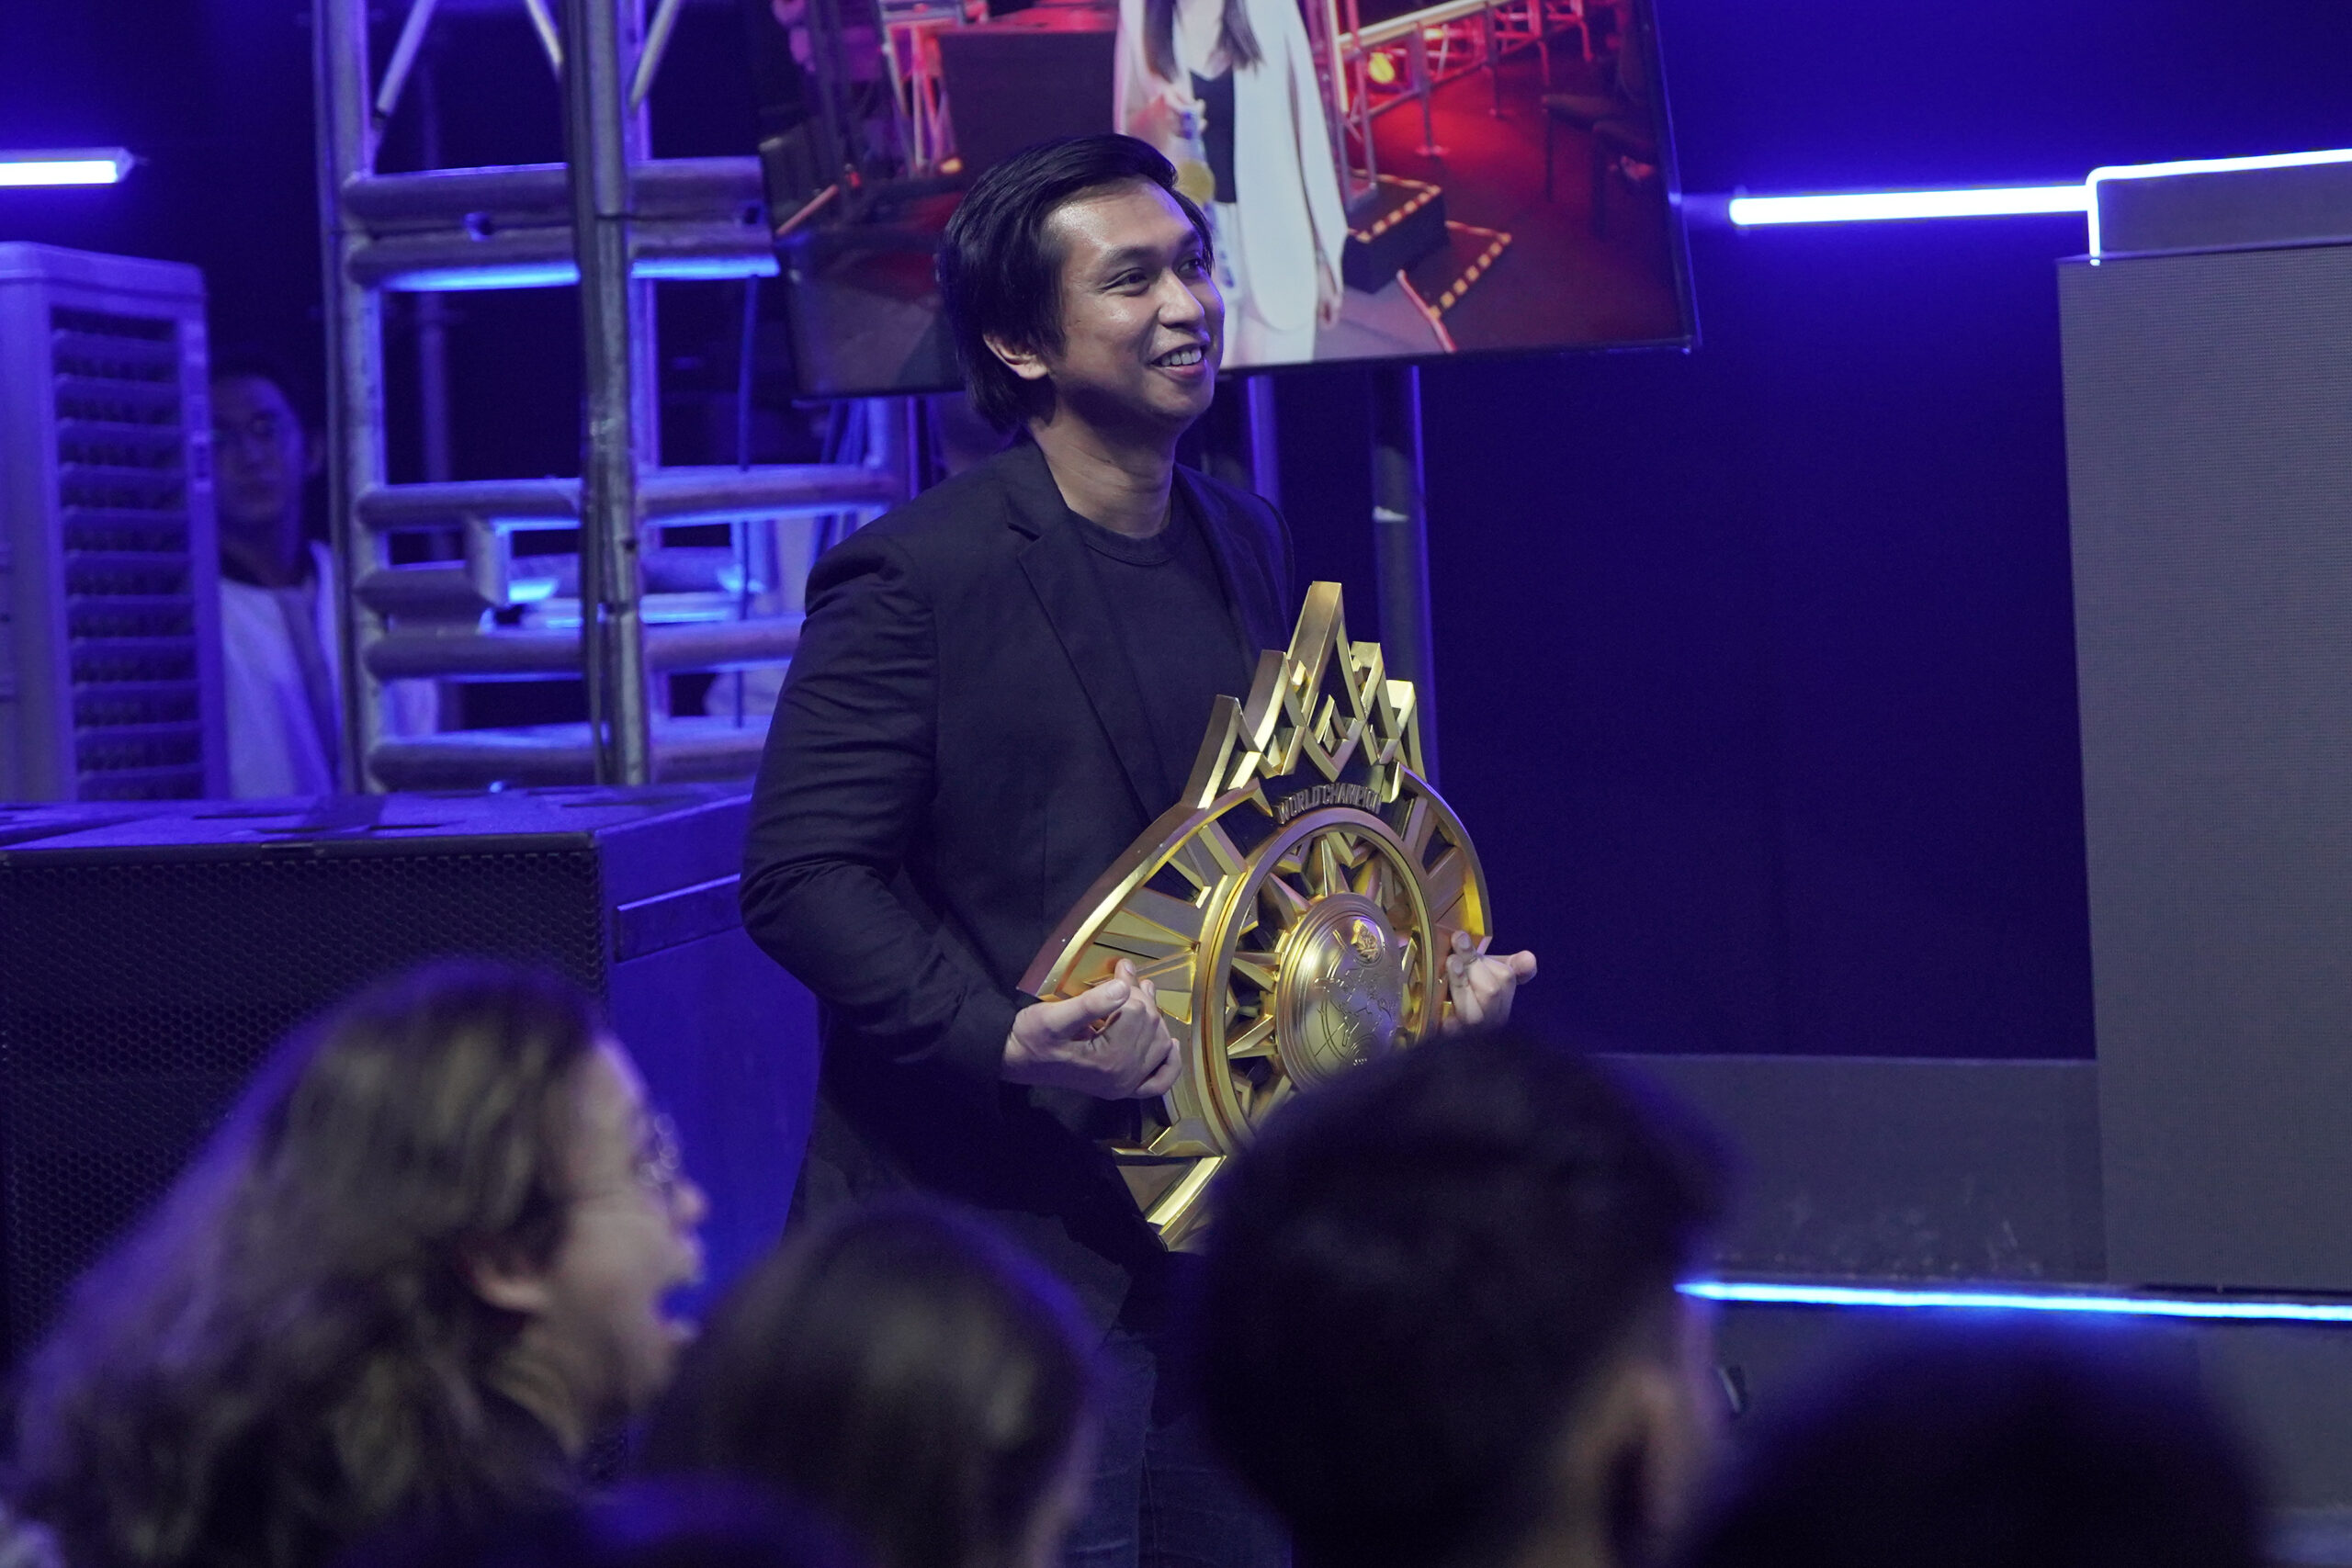 The History Behind the MPL PH’s Champion's Arena